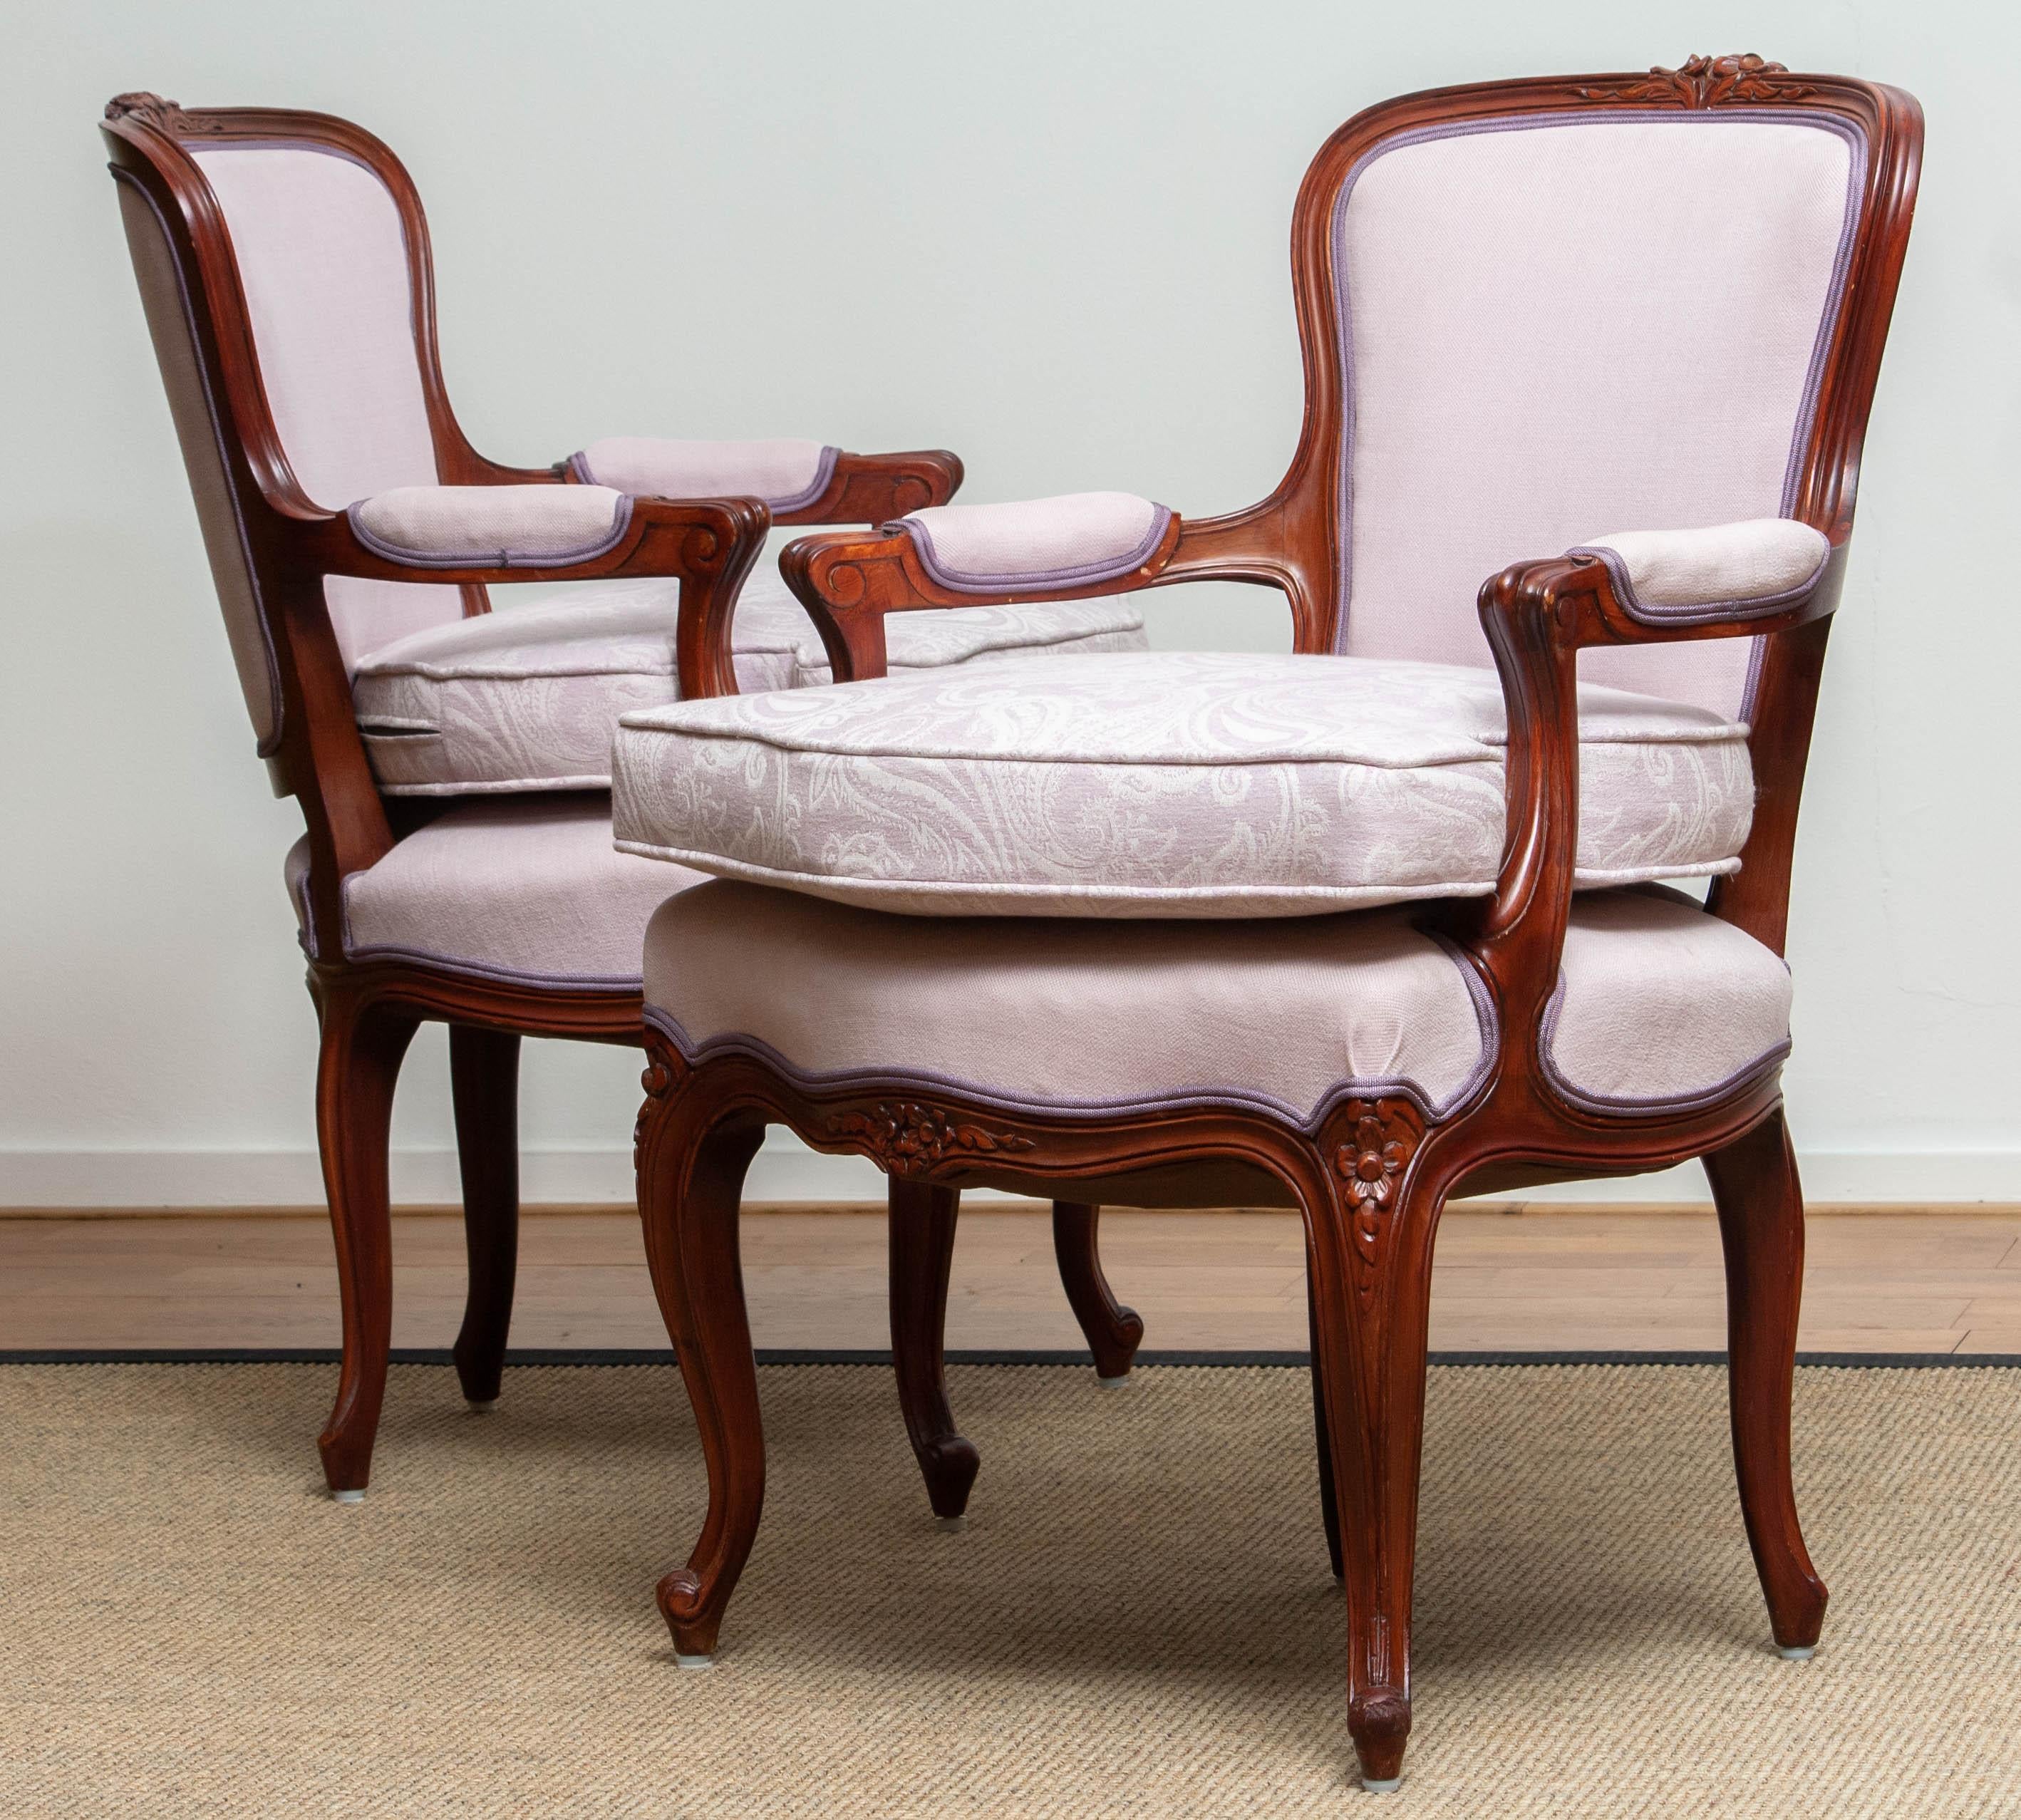 1950s Pair of Pink Swedish Rococo Bergères in the Shabby Chic Technique Chairs F 6